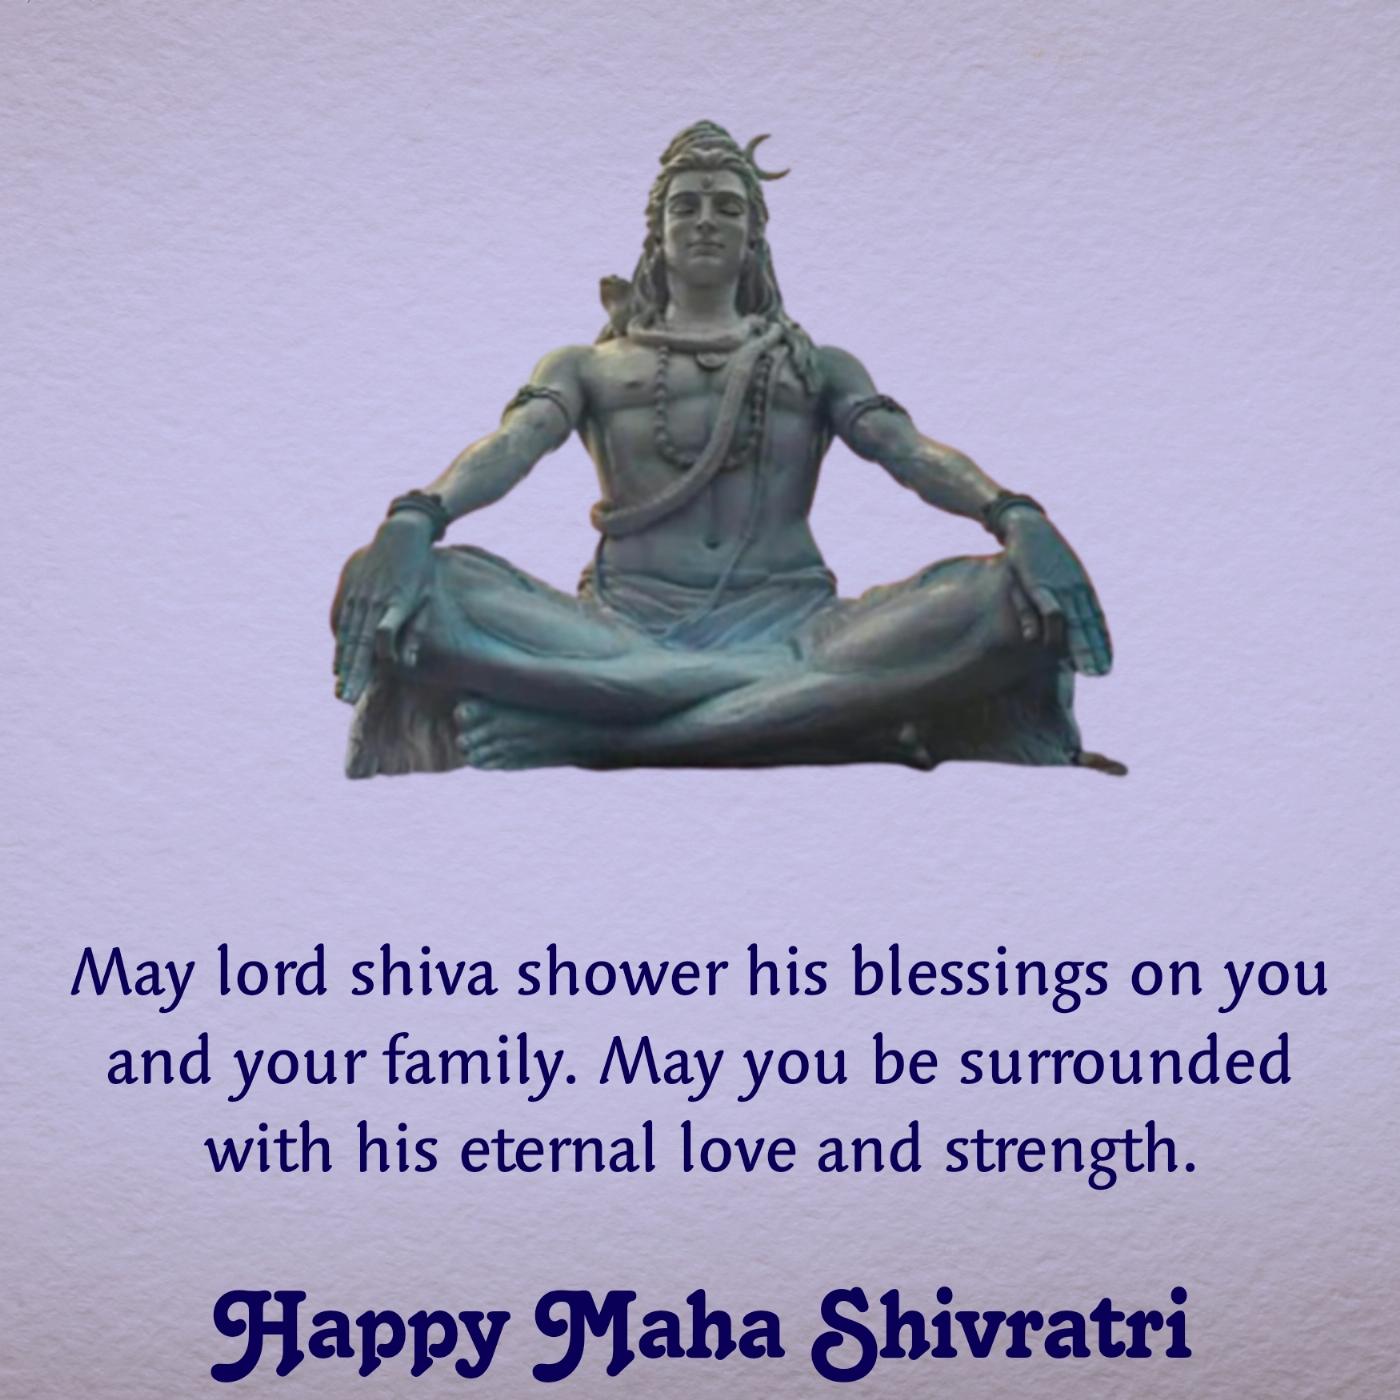 May lord shiva shower his blessings on you and your family